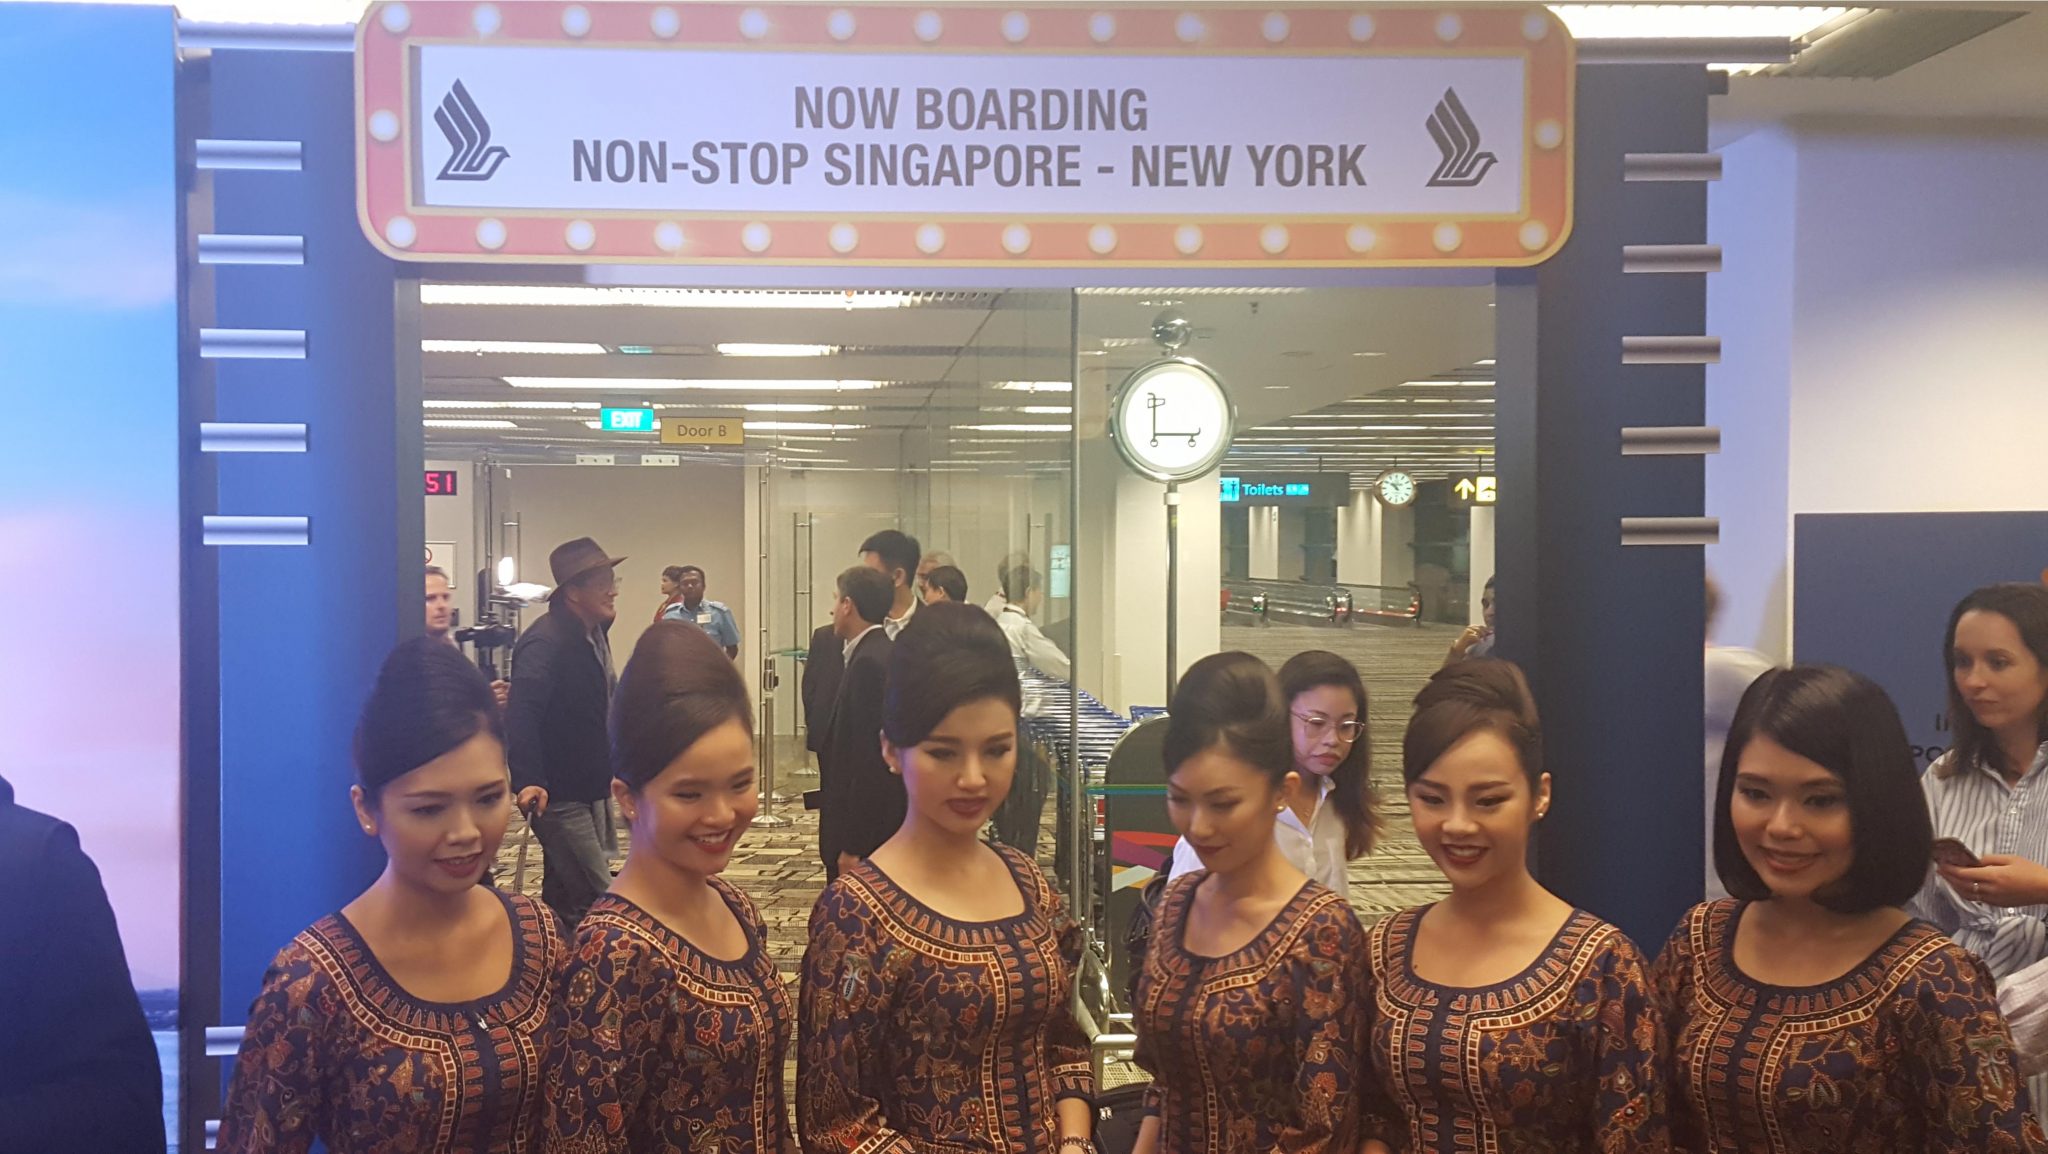 Singapore Girl Singapore Airlines cabin crew purple | Beauty and the best,  Stewardess hair, Singapore airlines